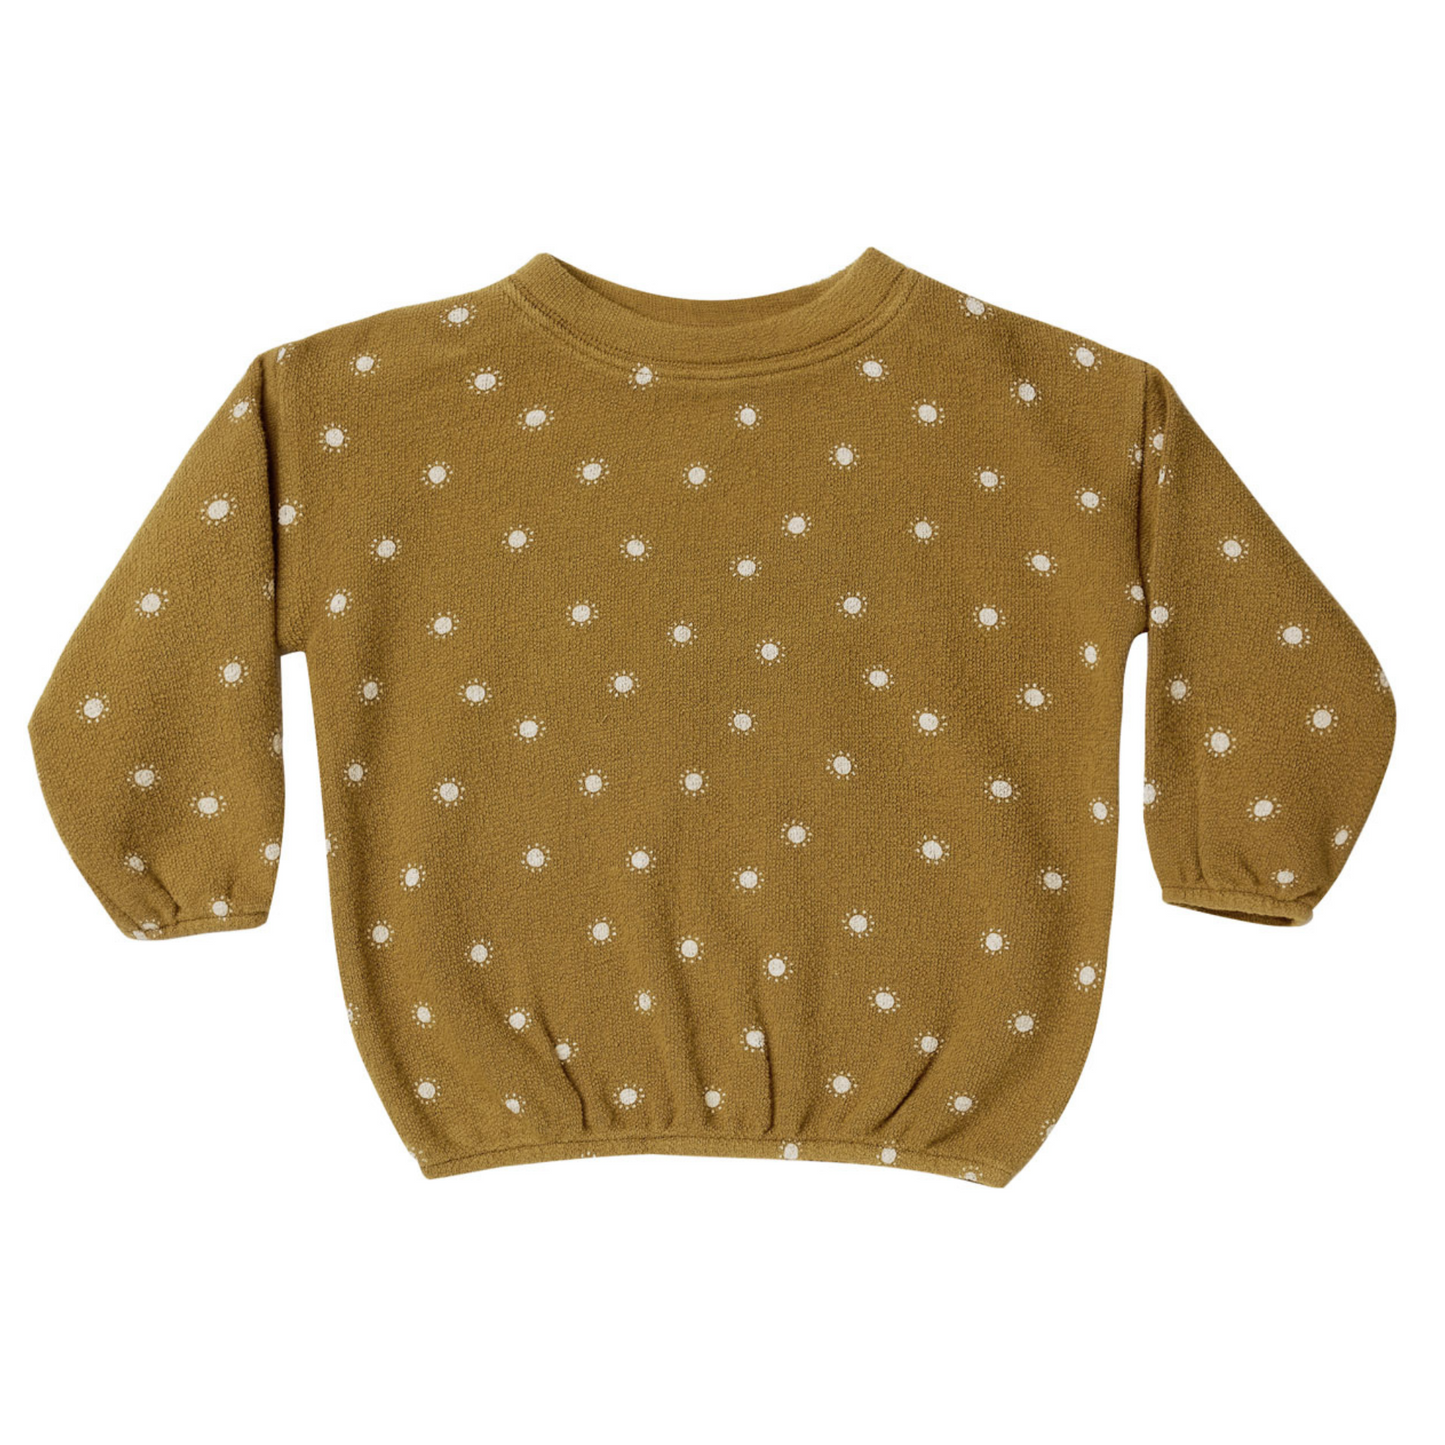 Rylee & Cru Slouchy Pullover, Suns